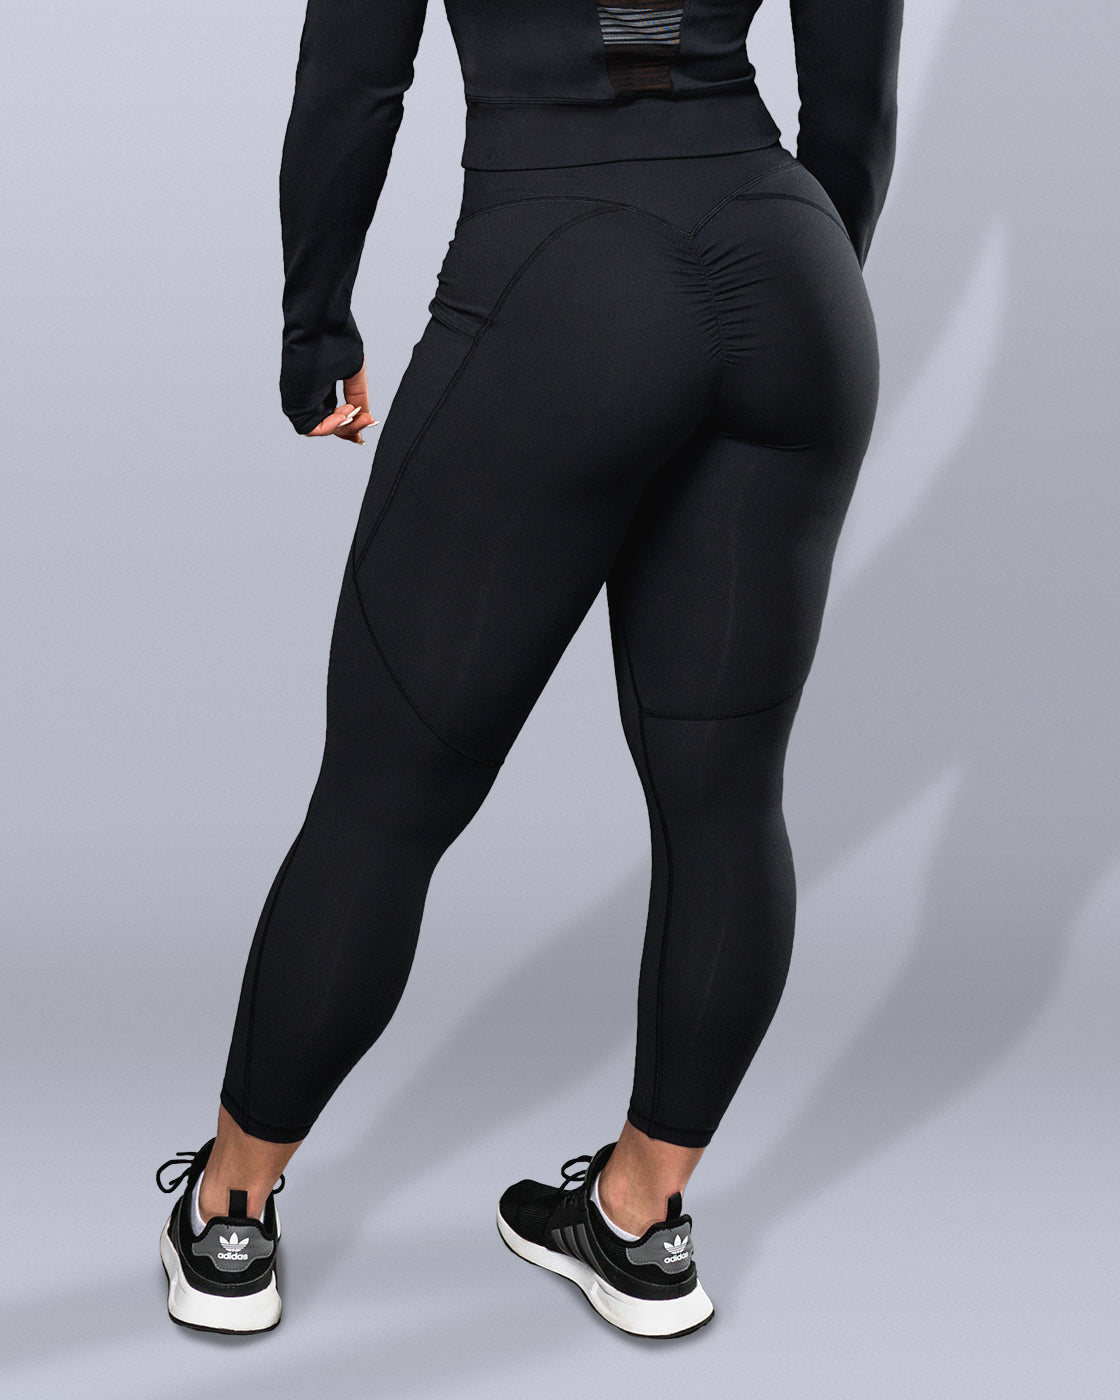 Violate the Dress Code, Pants & Jumpsuits, Luxe Black Scrunch Butt  Leggings By Violate The Dress Code